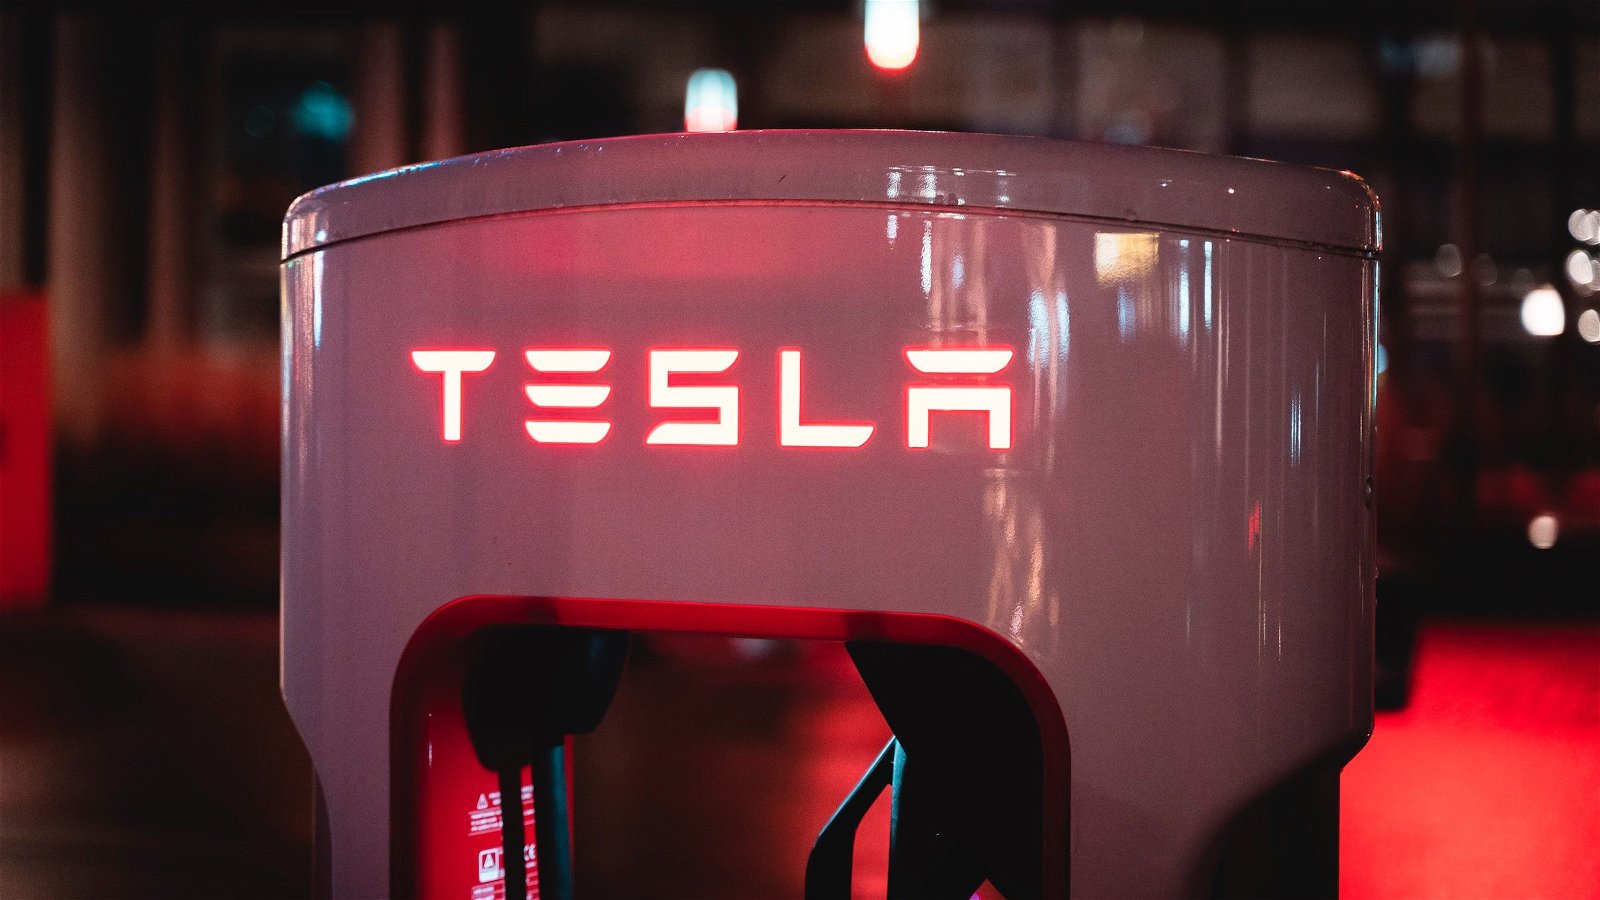 Here’s what’s important about Tesla Investor Day